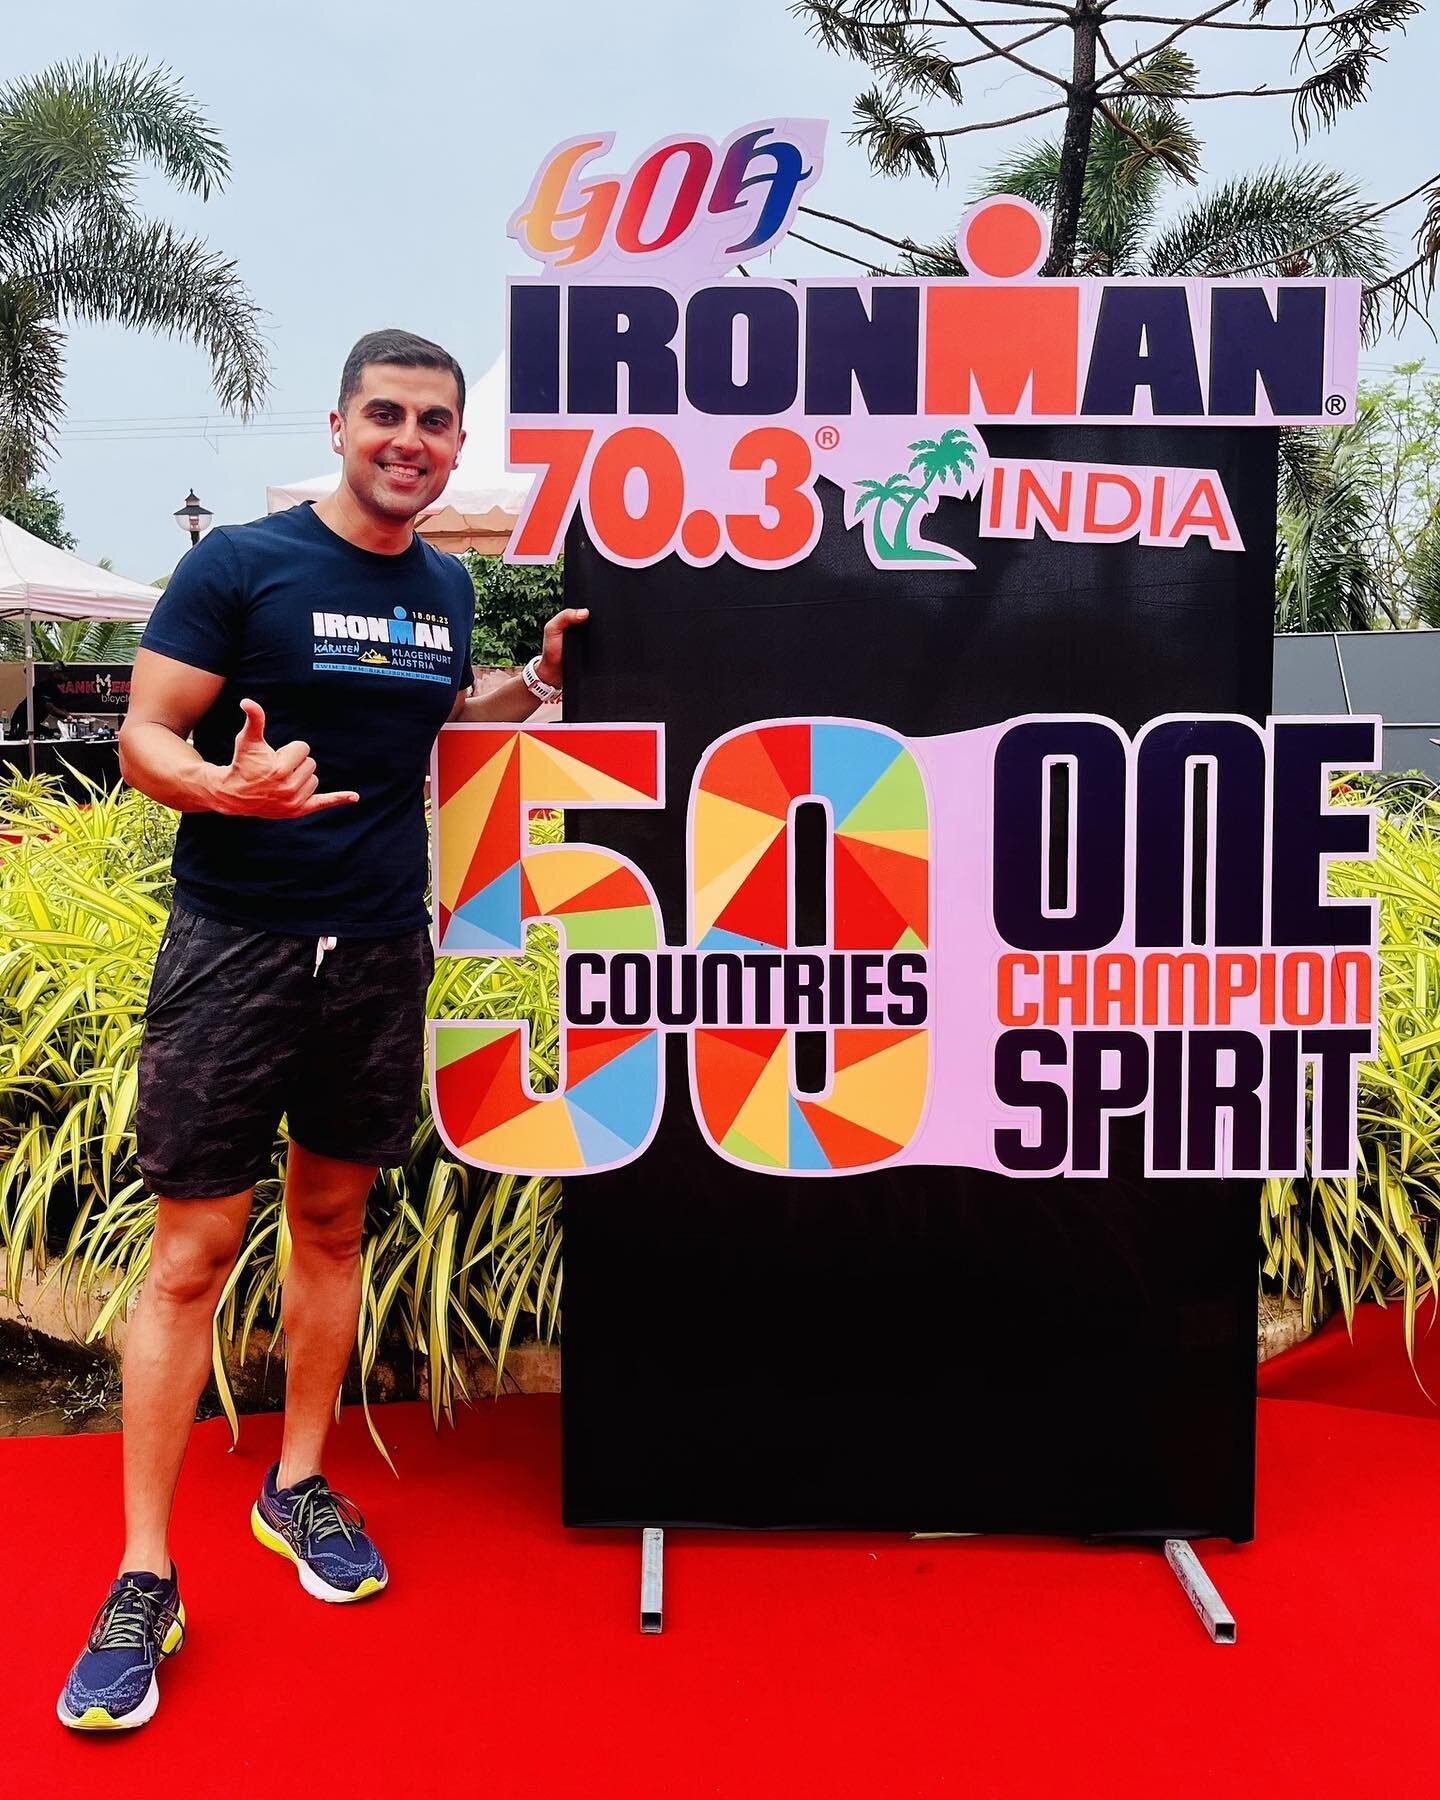 🏊&zwj;♂️🚴&zwj;♂️🏃&zwj;♂️ Excitement is in the air as we cheer on Raj Mehrotra taking on the India 70.3 triathlon this weekend in Goa! 🏁👏

👟 Raj, your dedication and hard work have brought you to this moment. We're proud of your journey and can'